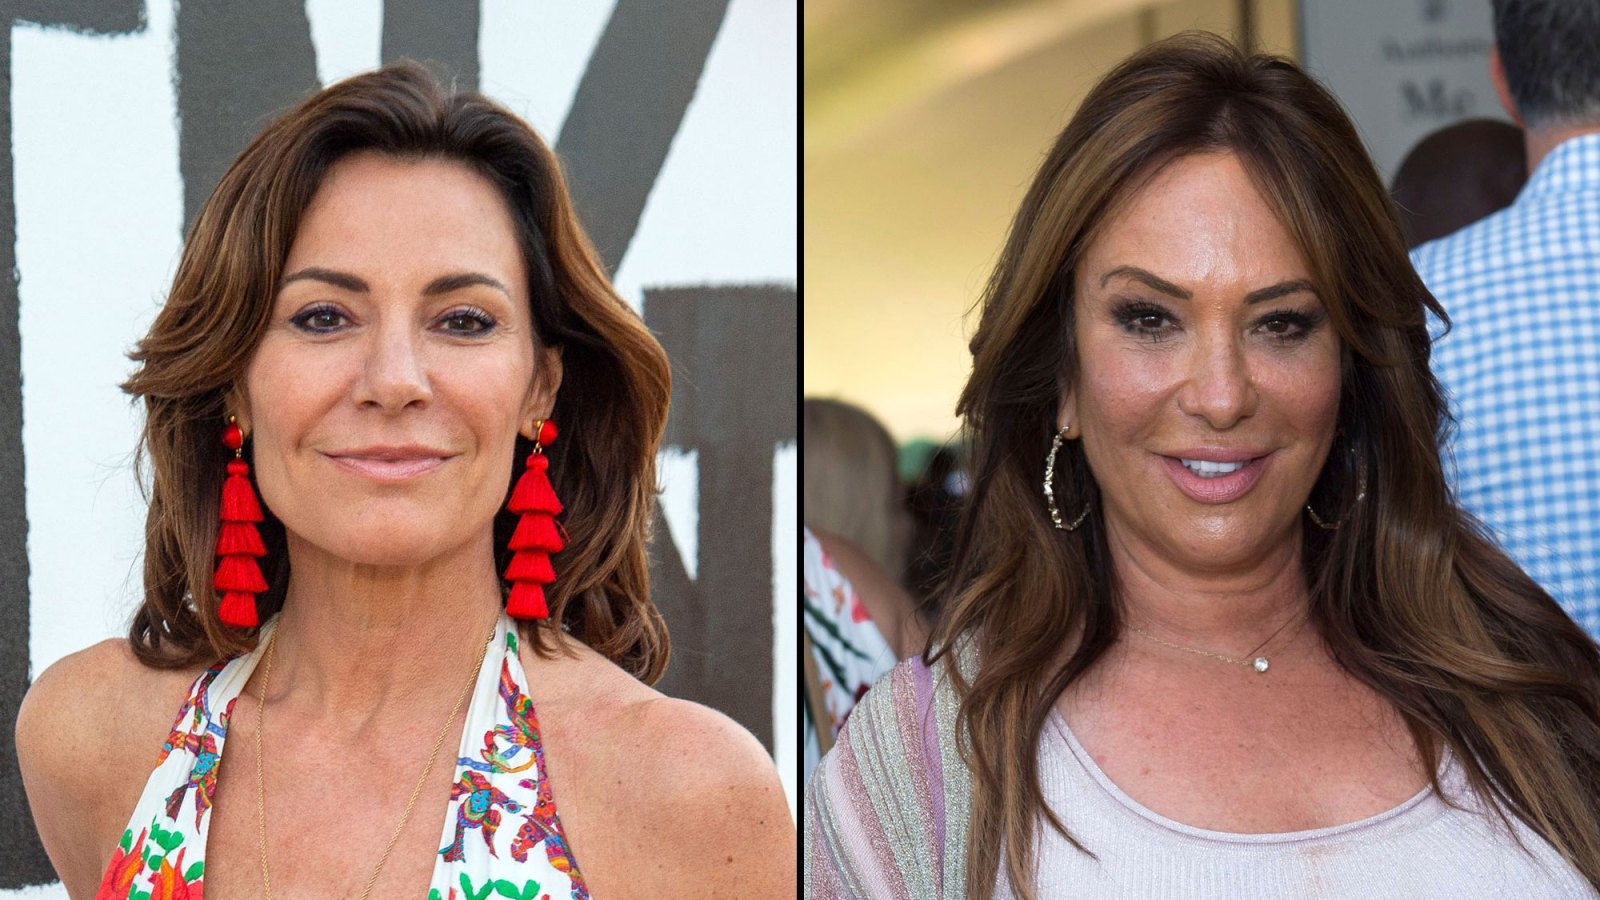 LuAnn de Lesseps Real Housewives Of New York Cast New Member After Barbara Kavovit Seemingly Exits